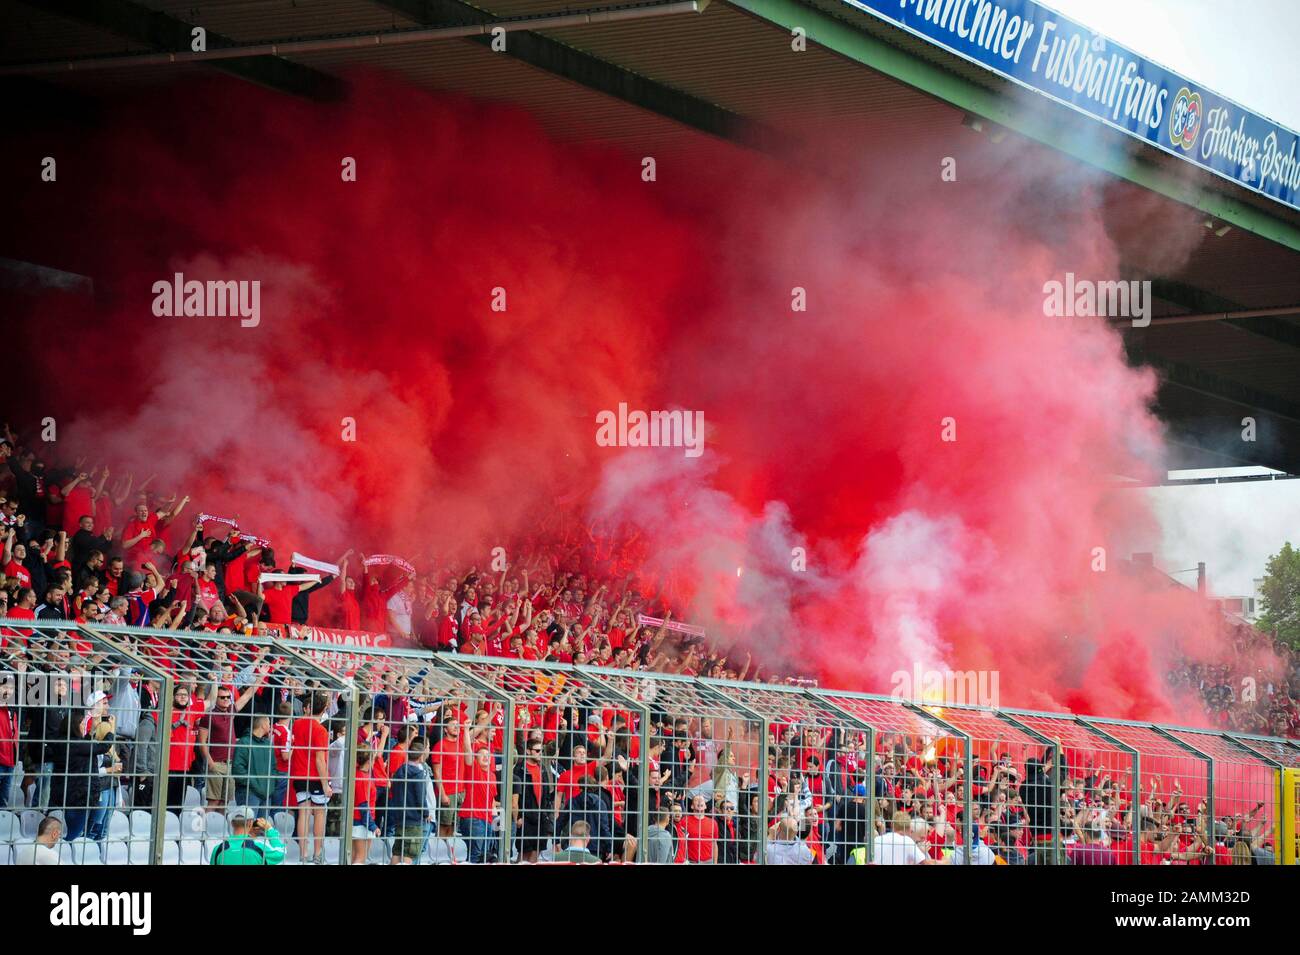 Derby in the southern regional football league: FC Bayern München II - TSV 1860 München II in the municipal stadium on Grünwalder Straße. The picture shows Bengalese fires in the block of the Bavarian fans on the counter tribune. [automated translation] Stock Photo